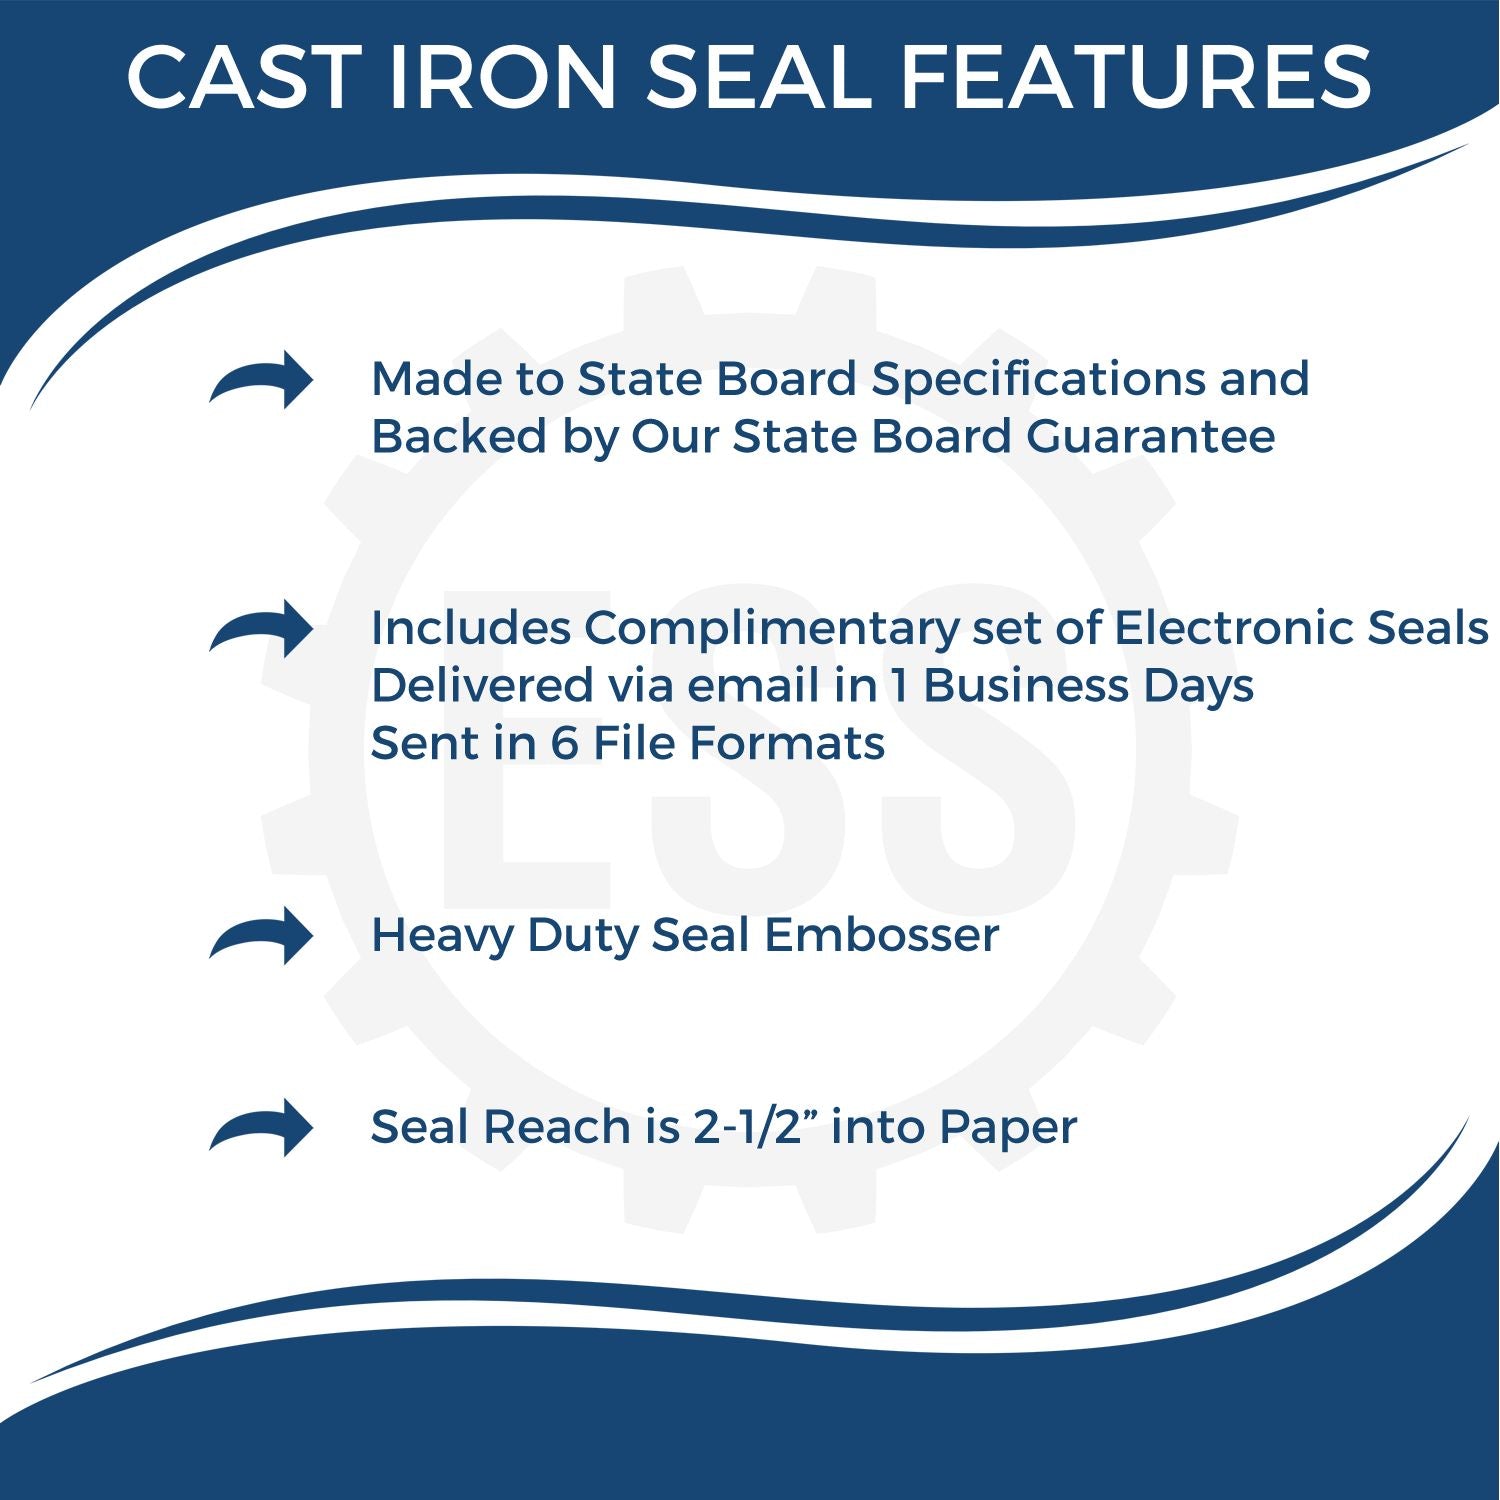 The main image for the Heavy Duty Cast Iron Mississippi Engineer Seal Embosser depicting a sample of the imprint and electronic files